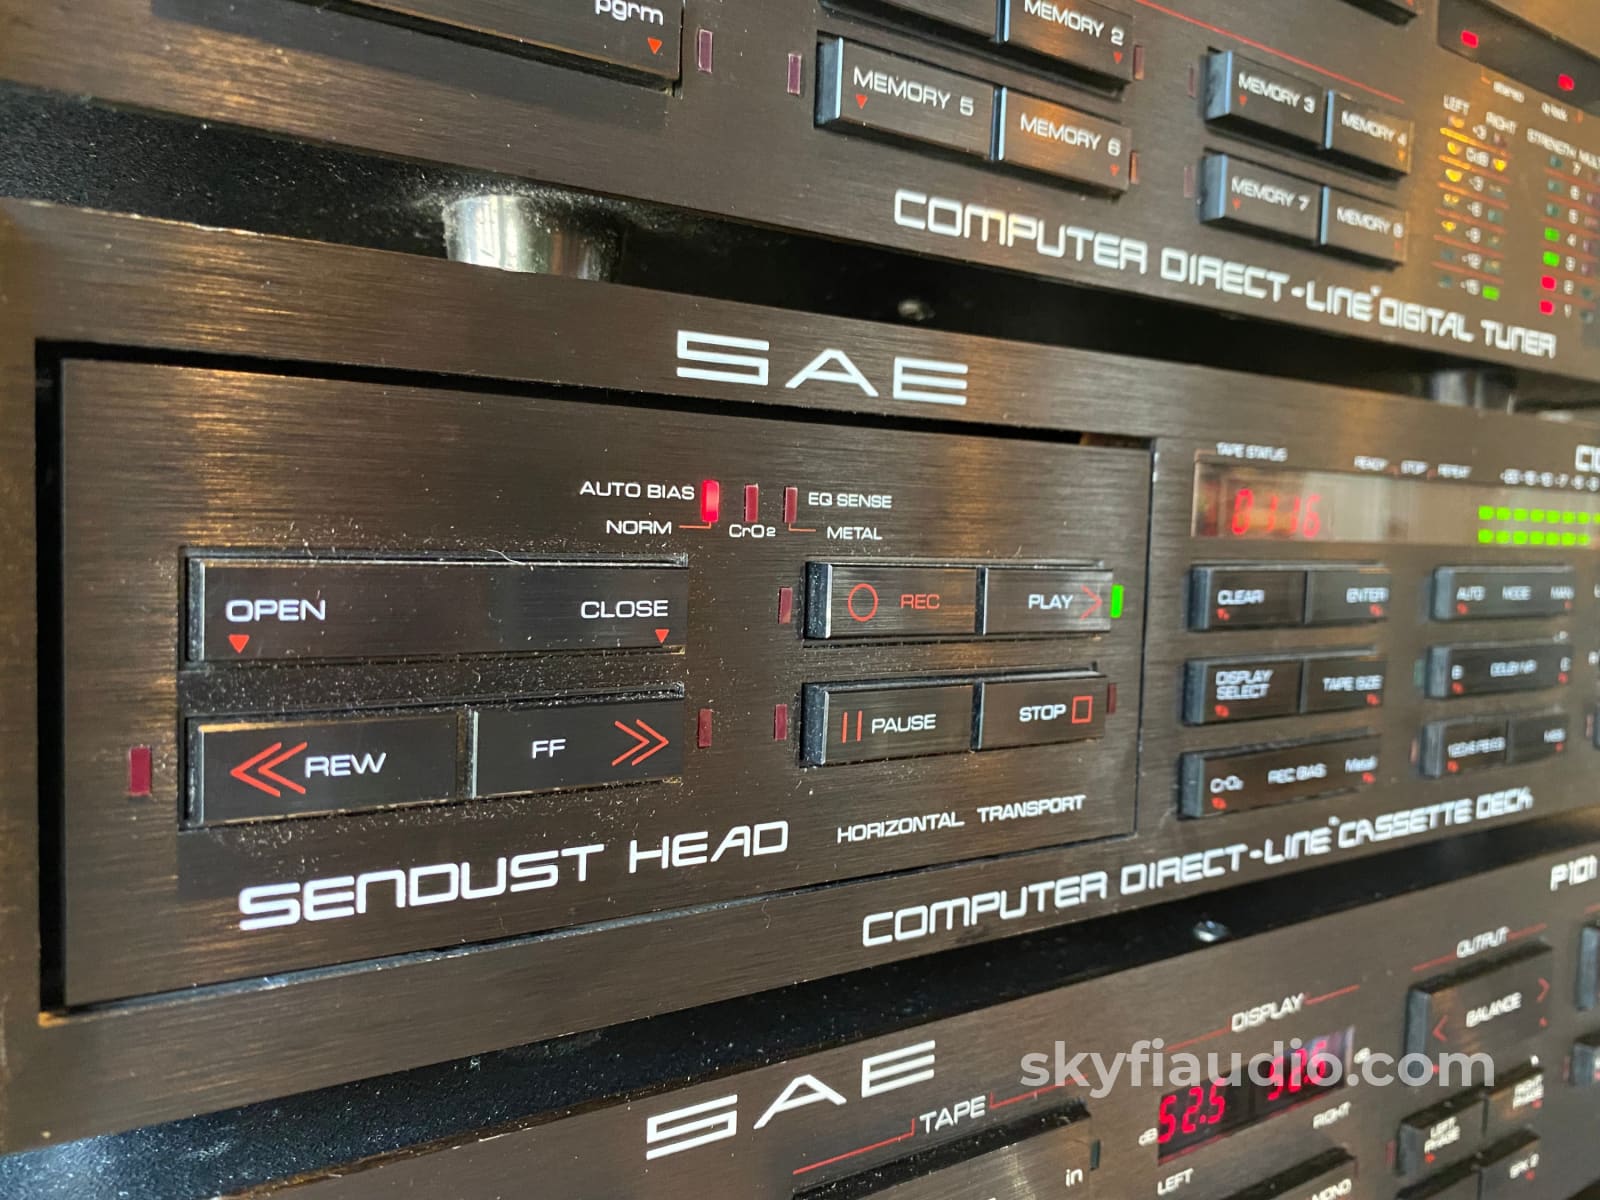 Sae 01 Complete System From The 1980S Serviced See Video